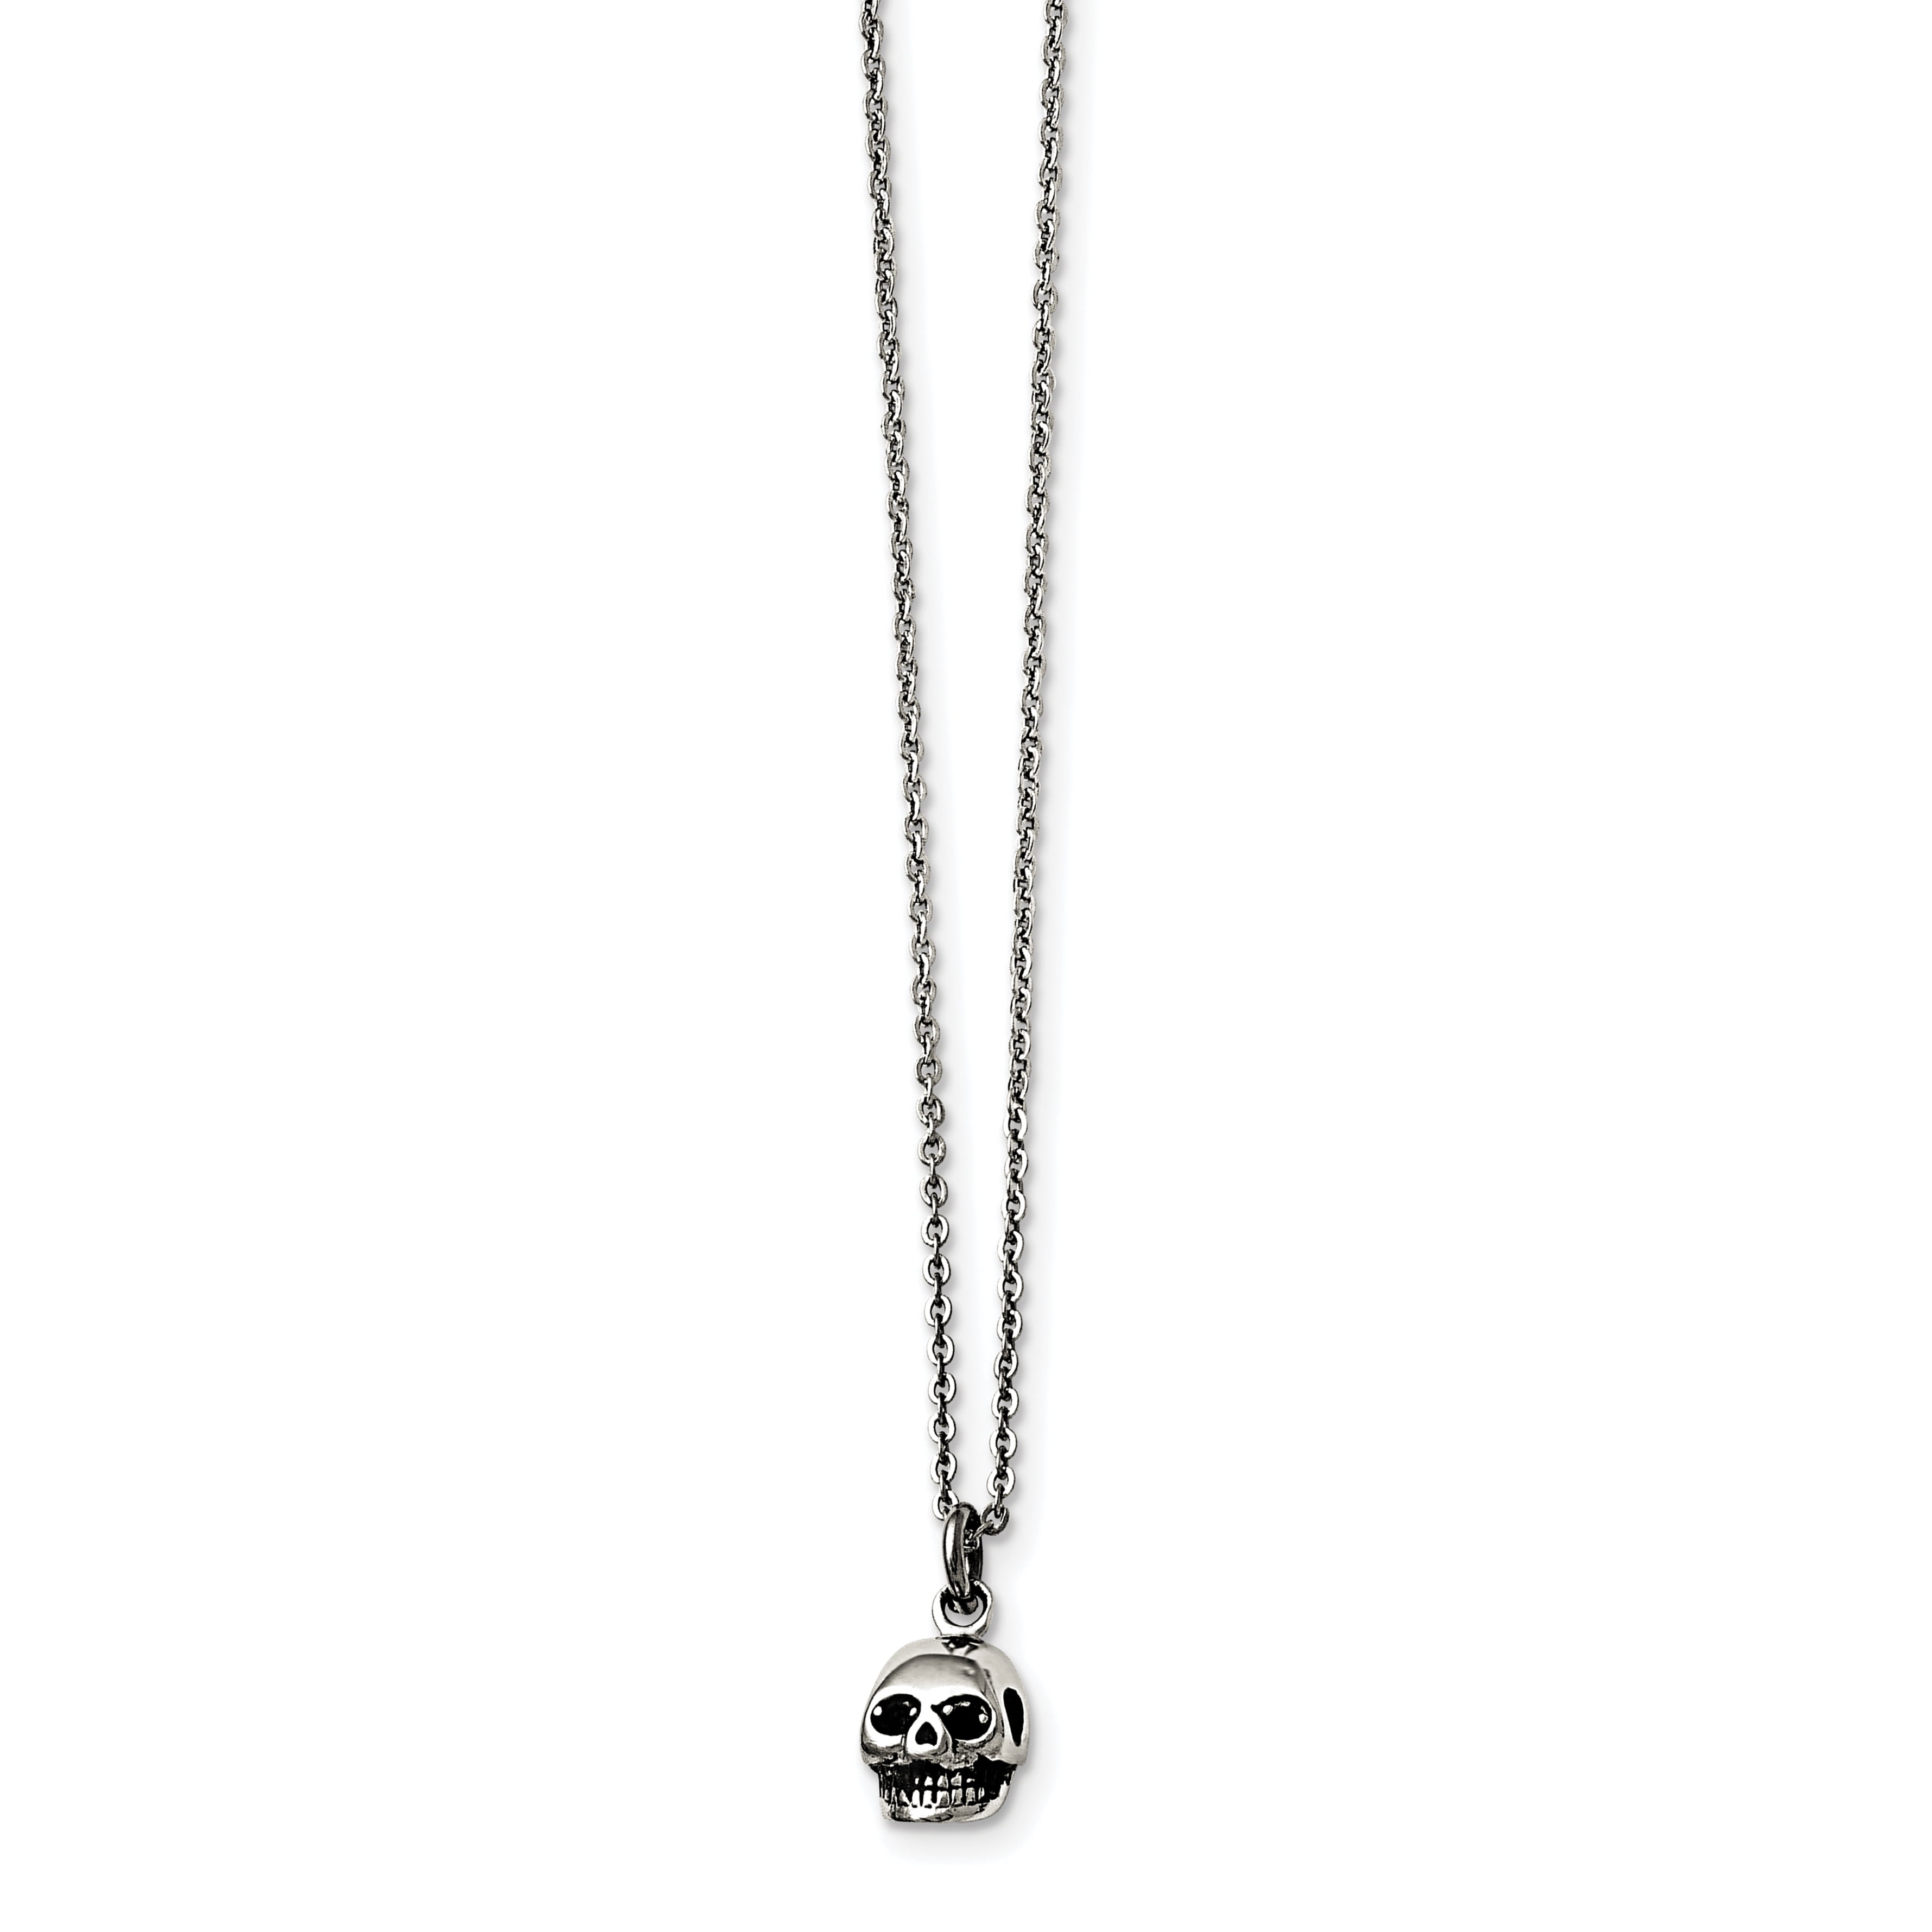 Pirate Skull Bead Necklaces